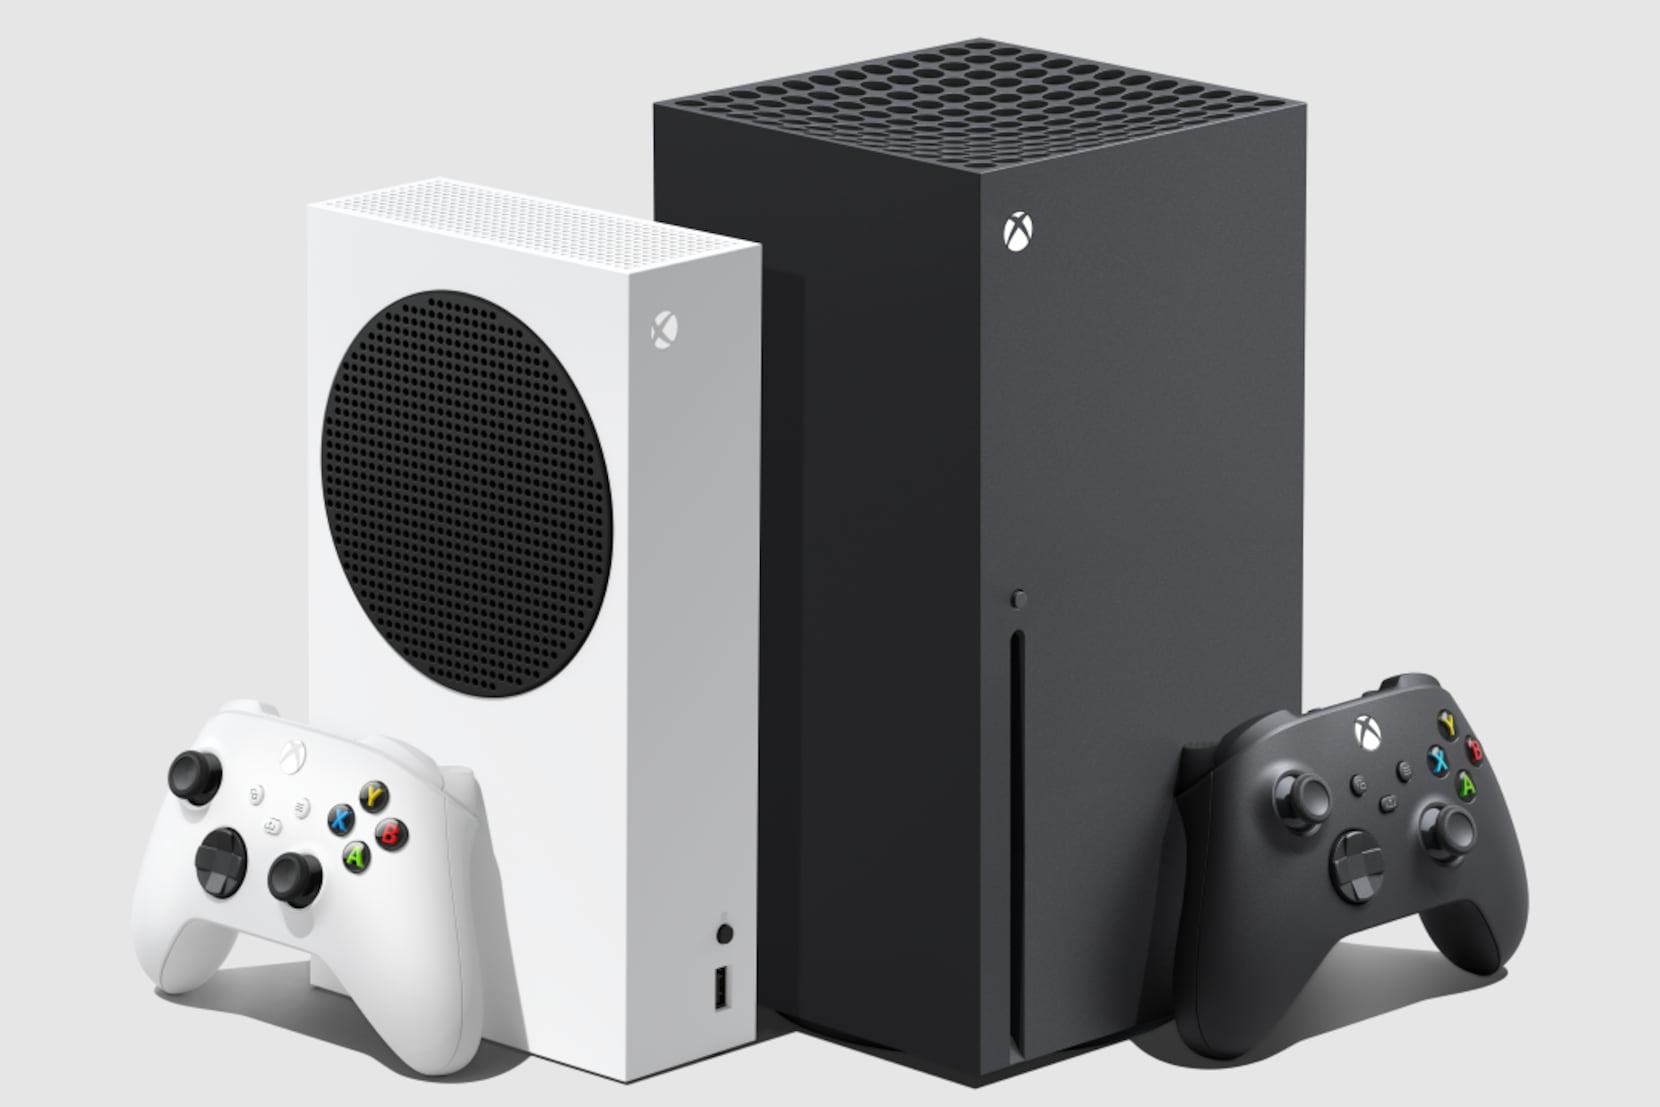 Microsoft shows off 30 new video games as Xbox turns 20, few to be up on  its monthly subscription service - The Economic Times